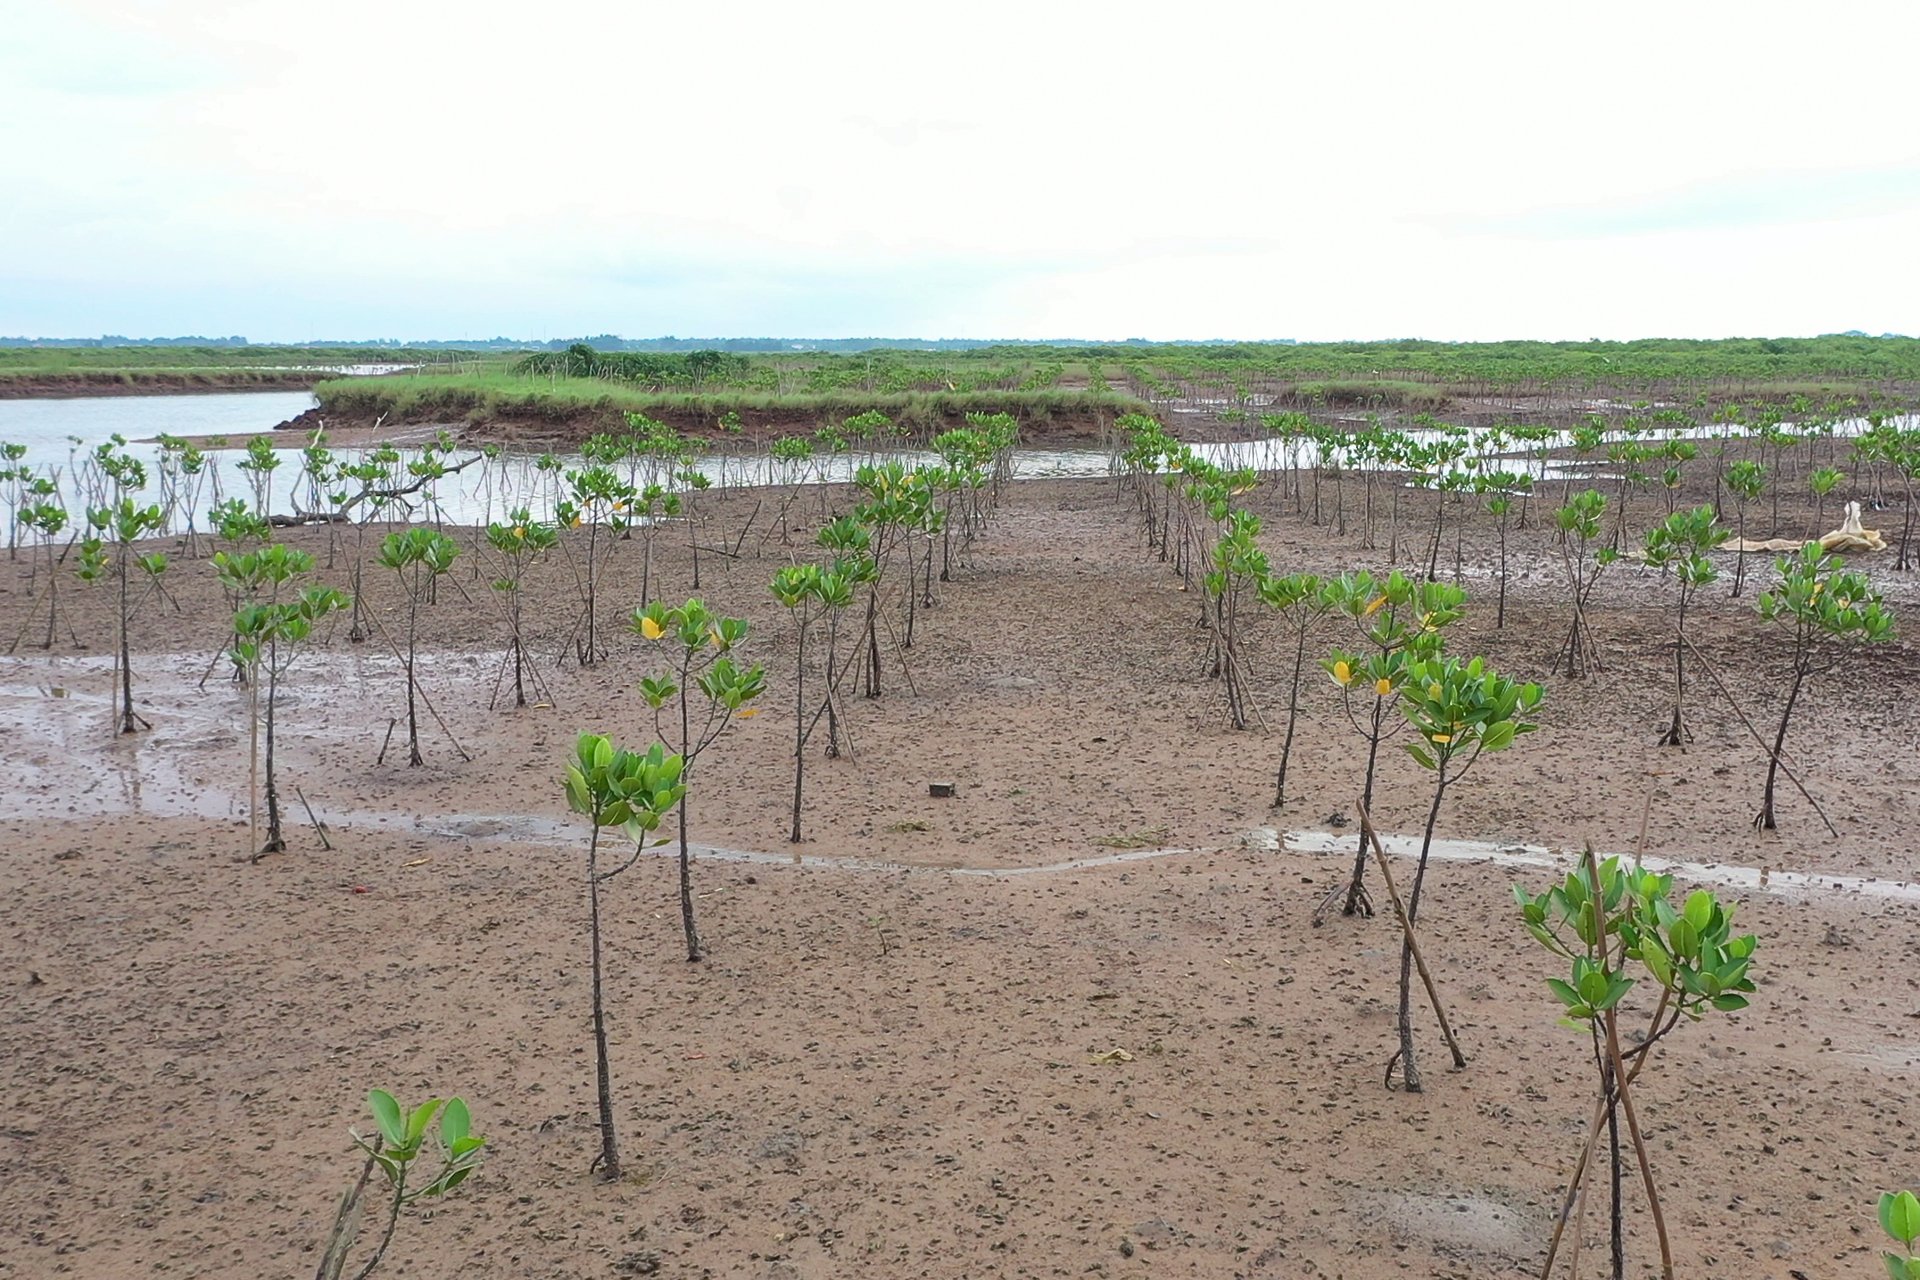 Mangrove reforestation not only improves the ecosystem but also helps local residents enhance their livelihoods and stabilize their income. Photo: Tung Dinh.